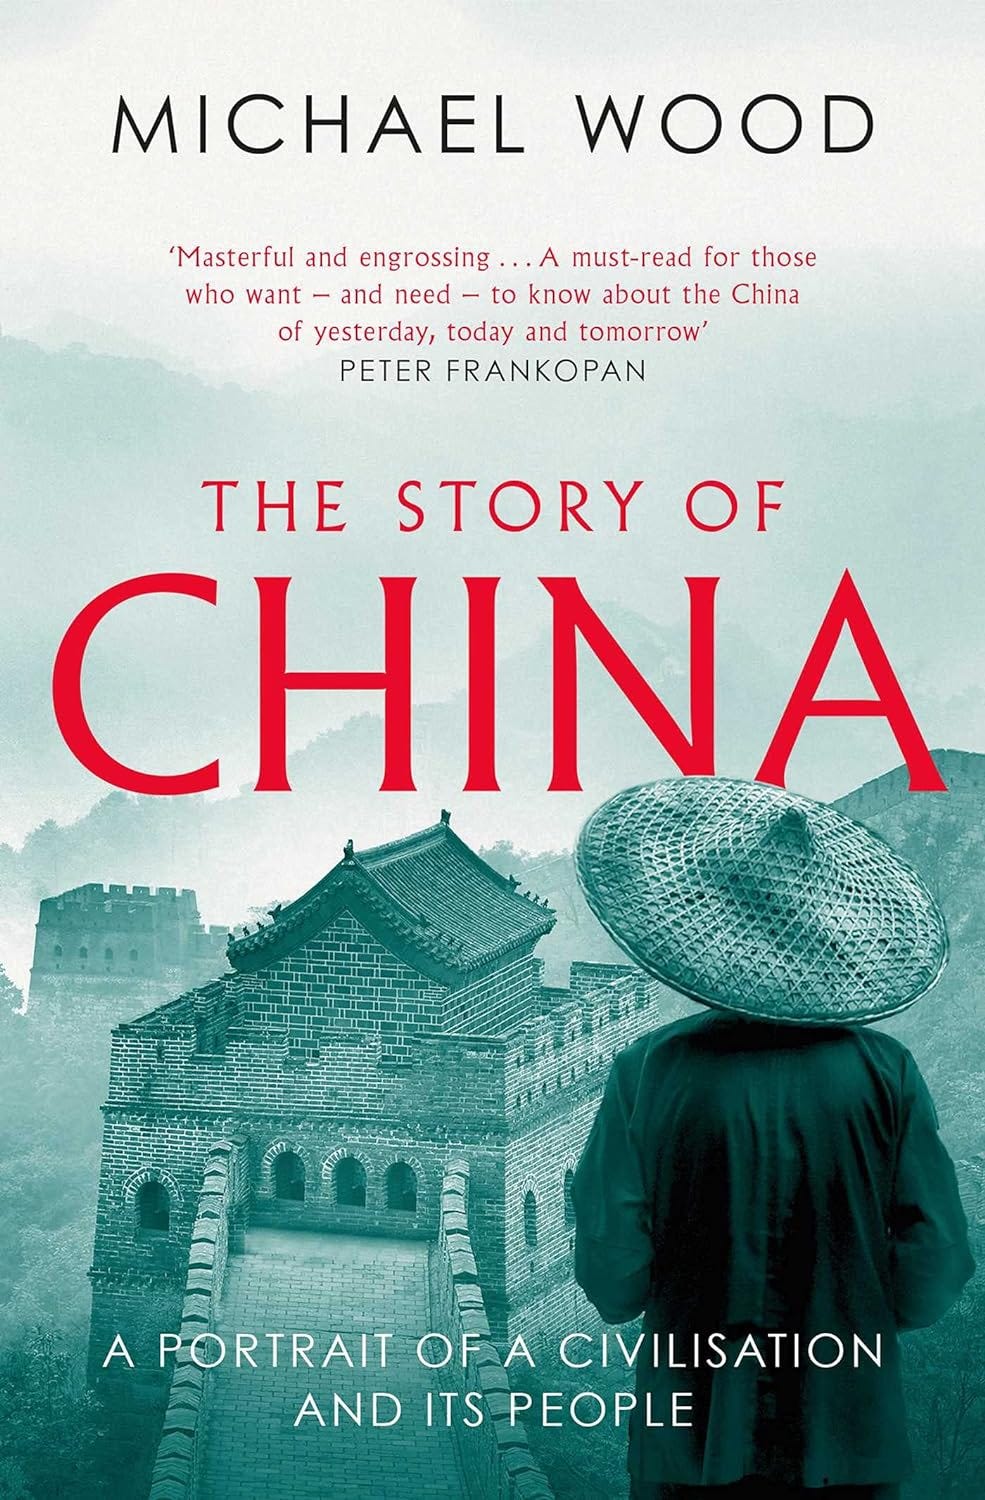 The book cover of The Story of China by Michael Wood